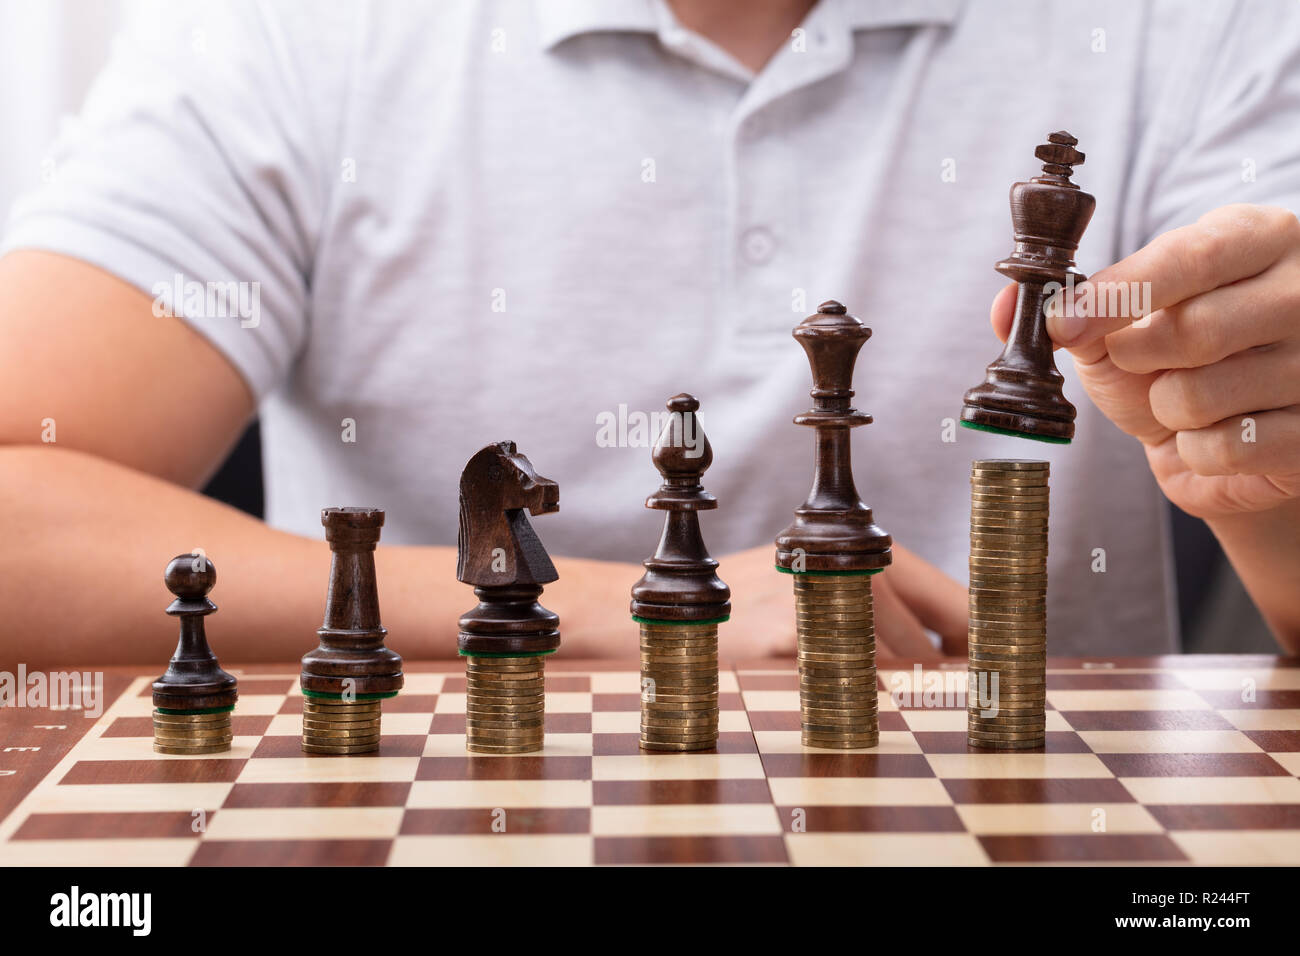 Man's Hand Placing King Chess Piece On Stacked Coins Over Chessboard Stock Photo